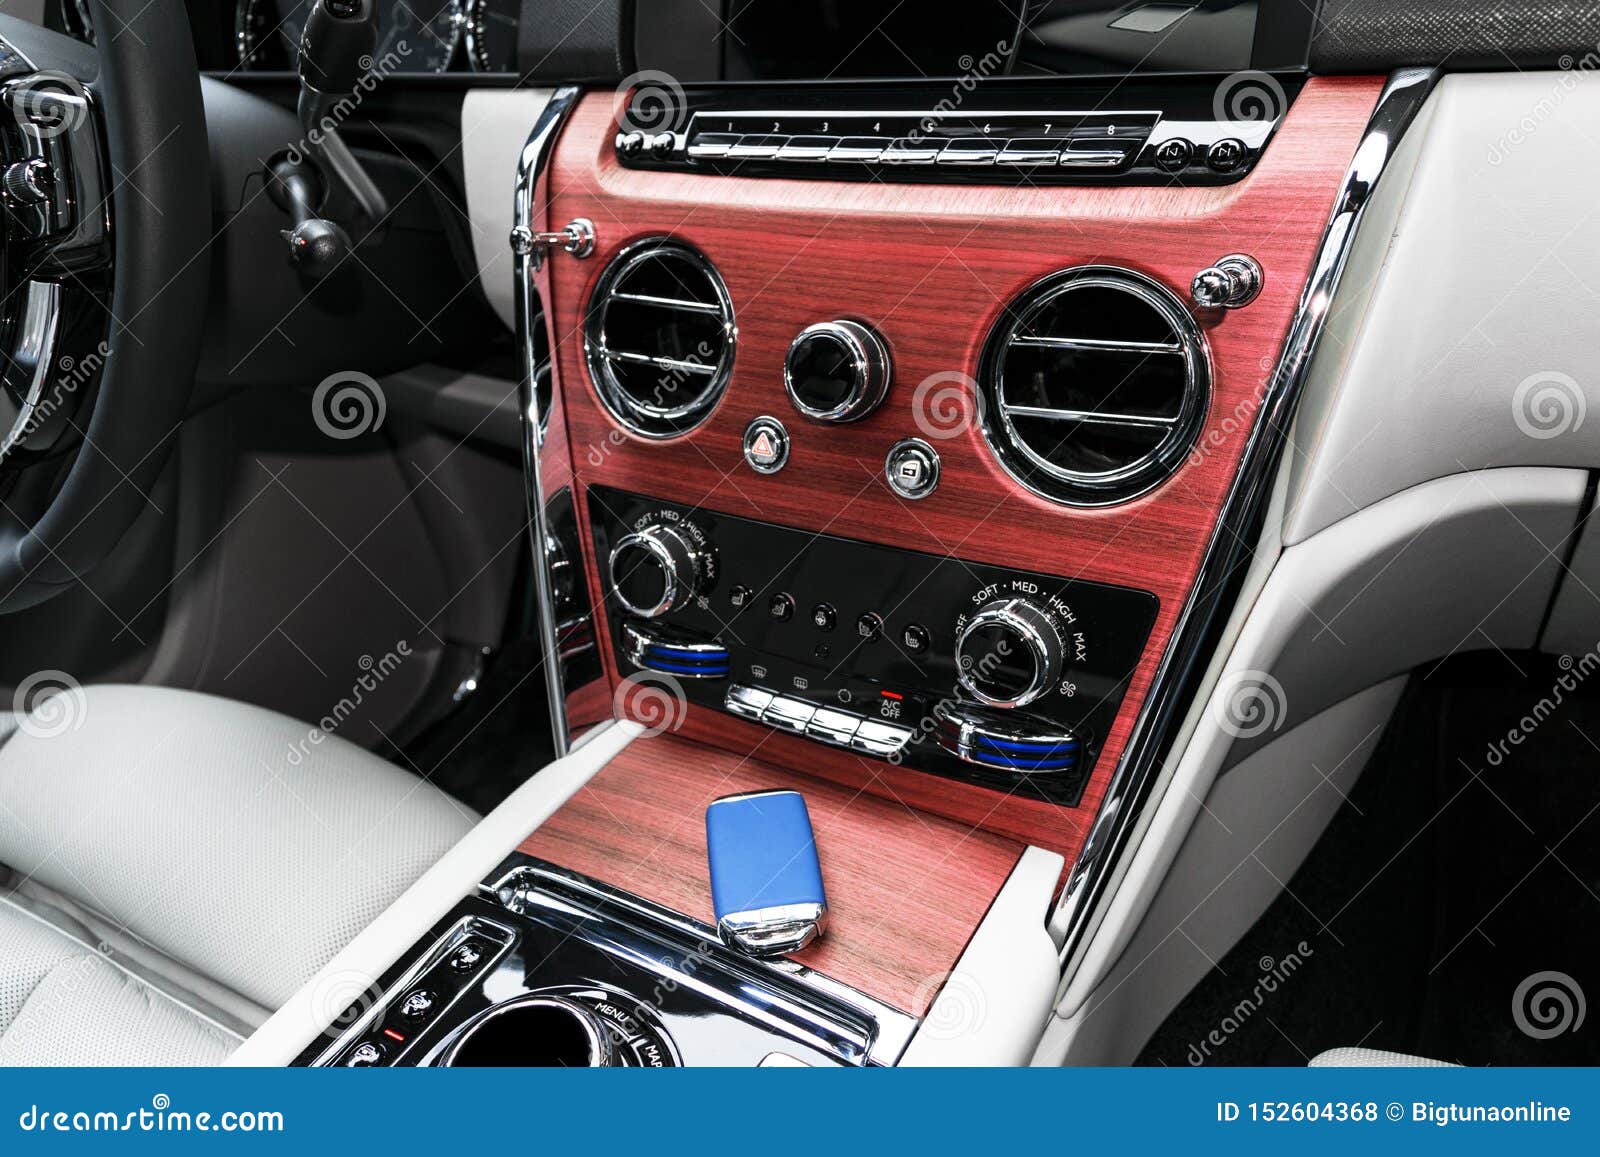 Modern Luxury Car Inside Interior Of A Vehicle With Natural